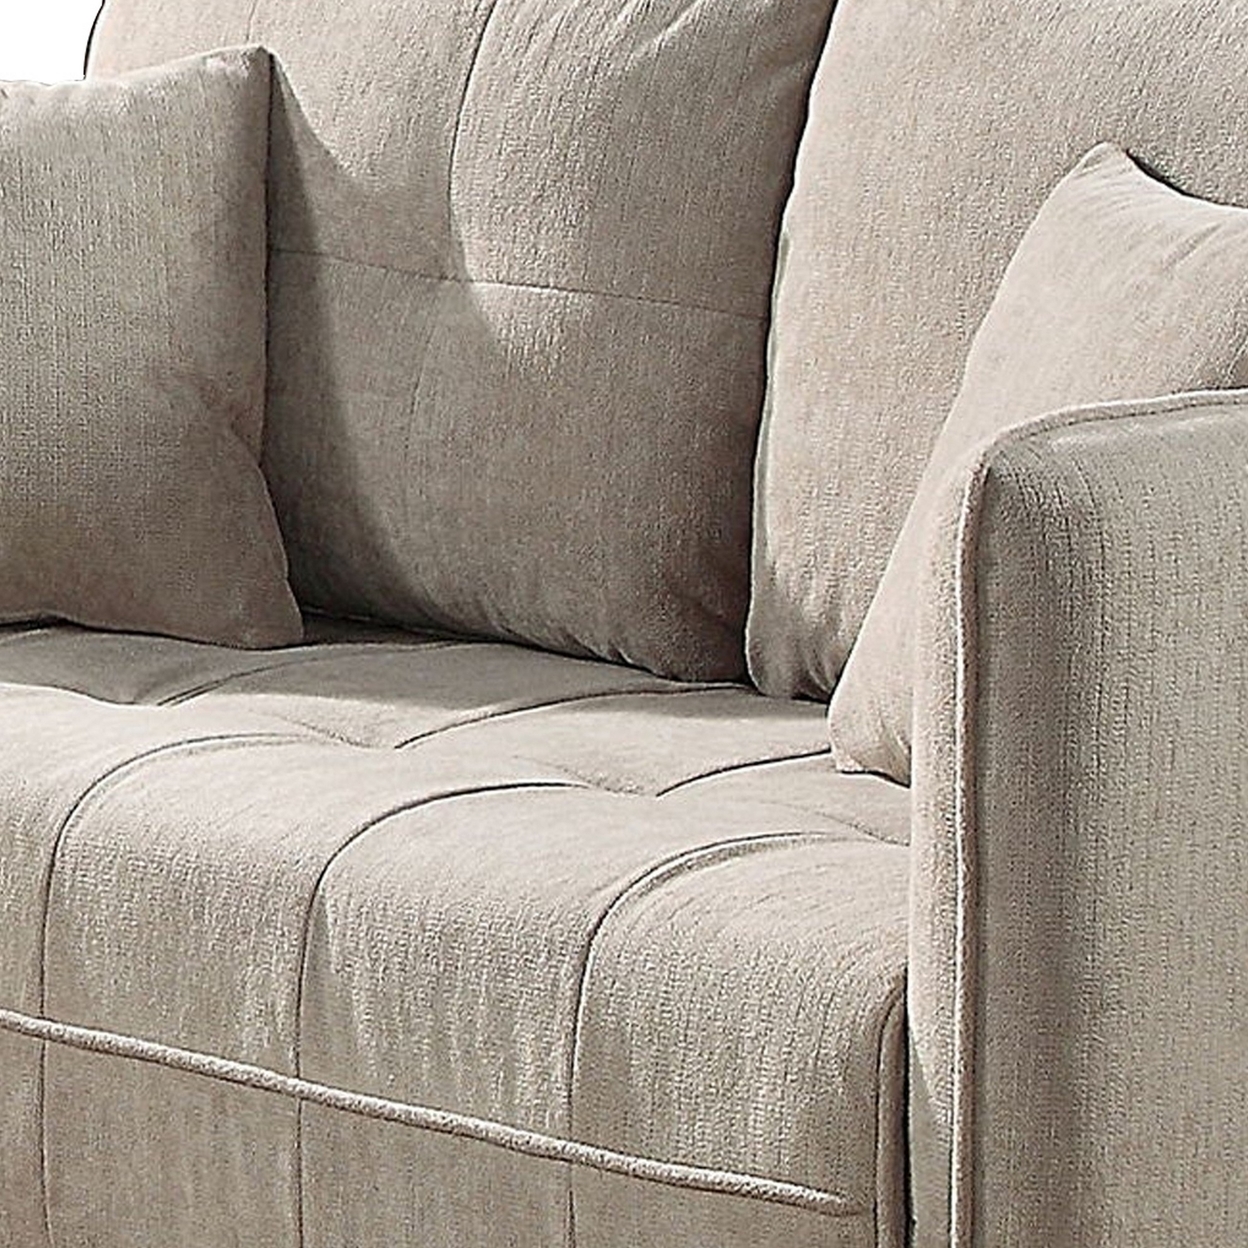 Hak 52 Inch Loveseat, Rounded Curved Arms, Biscuit Tufting, Wood Legs, Taupe - Saltoro Sherpi